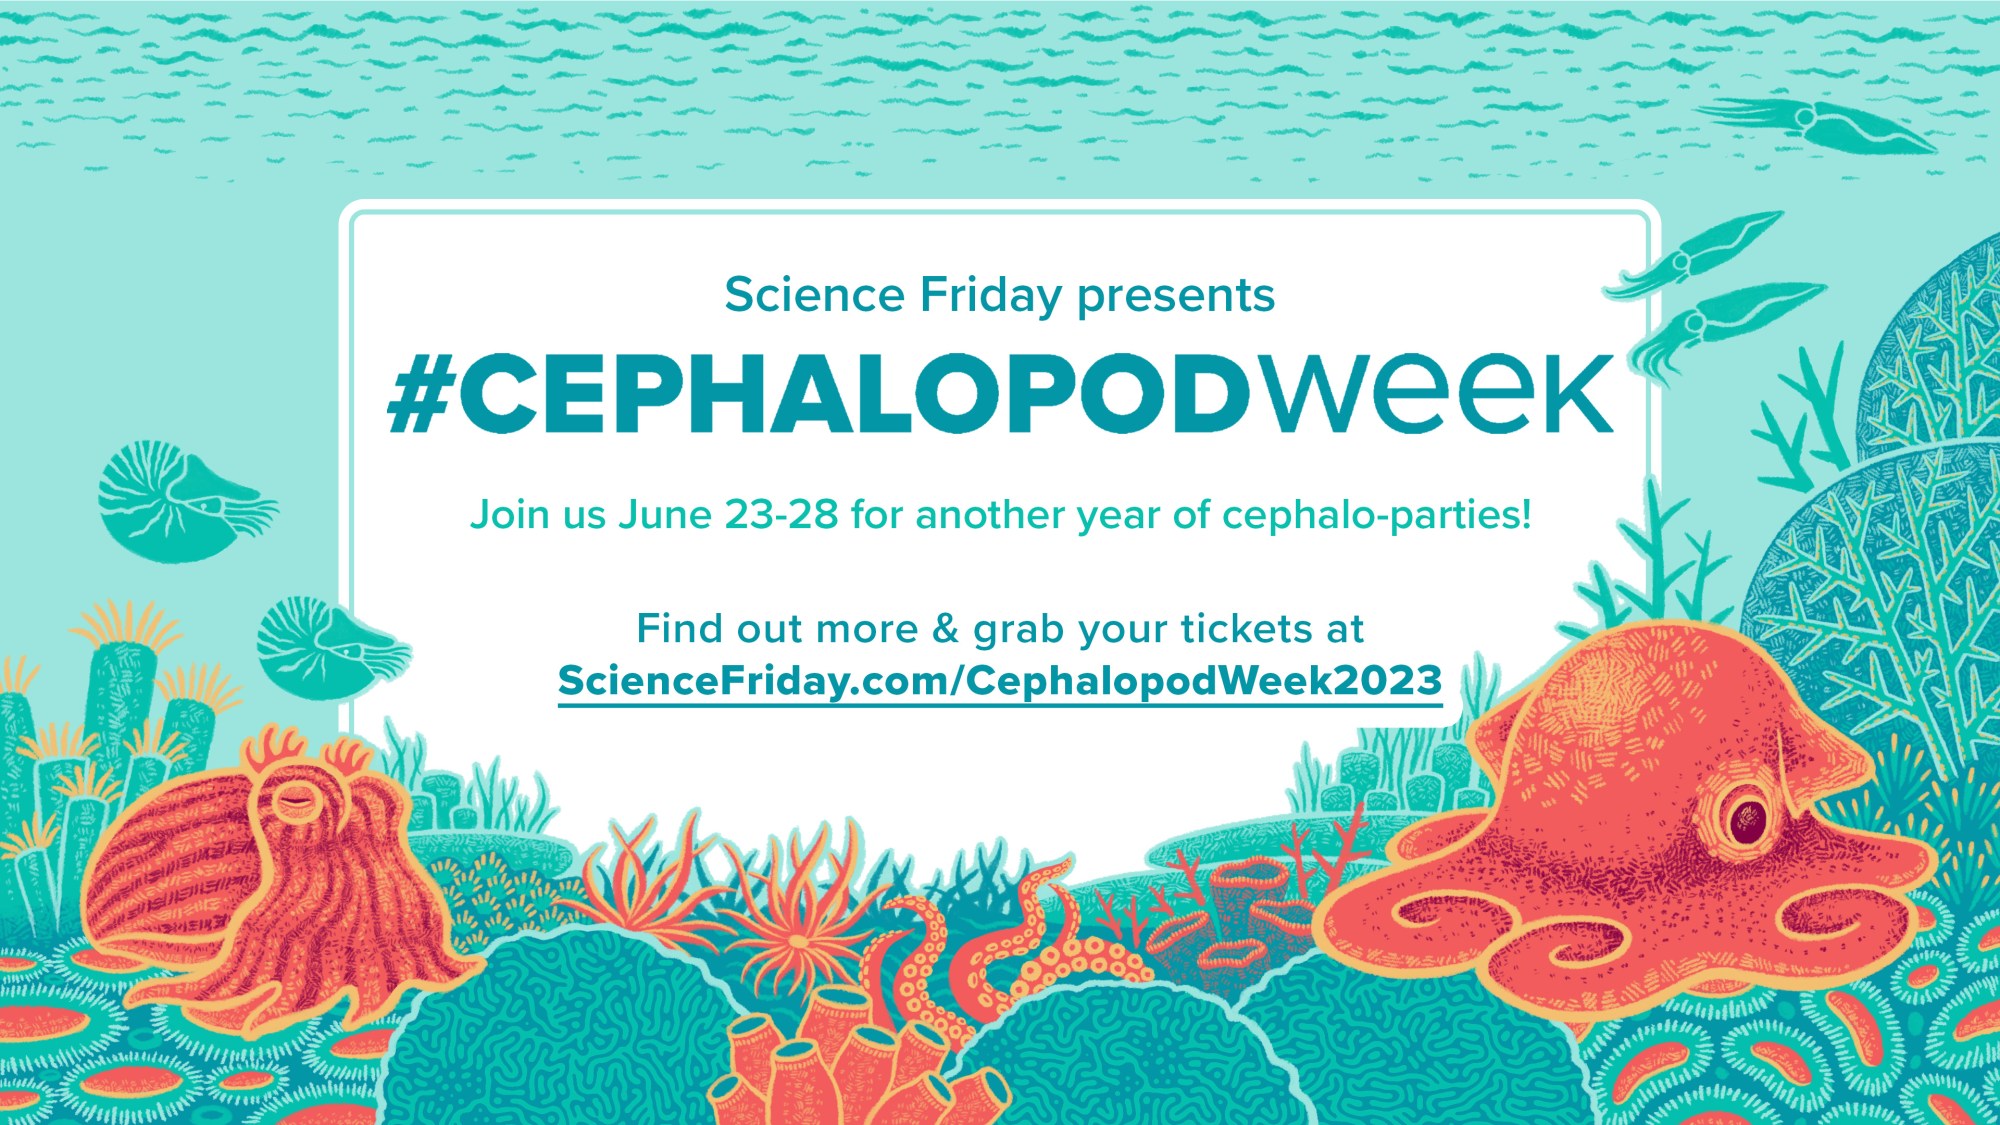 Event promotional image. An illustrated underwater scene featuring two cephalopods on a coral reef, with smaller cephalopods swimming in the background. The text reads: Science Friday presents #CephalopodWeek. Join us June 23-28 for another year of cephalo-parties! Find out more & grab your tickets at ScienceFriday.com/CephalopodWeek2023